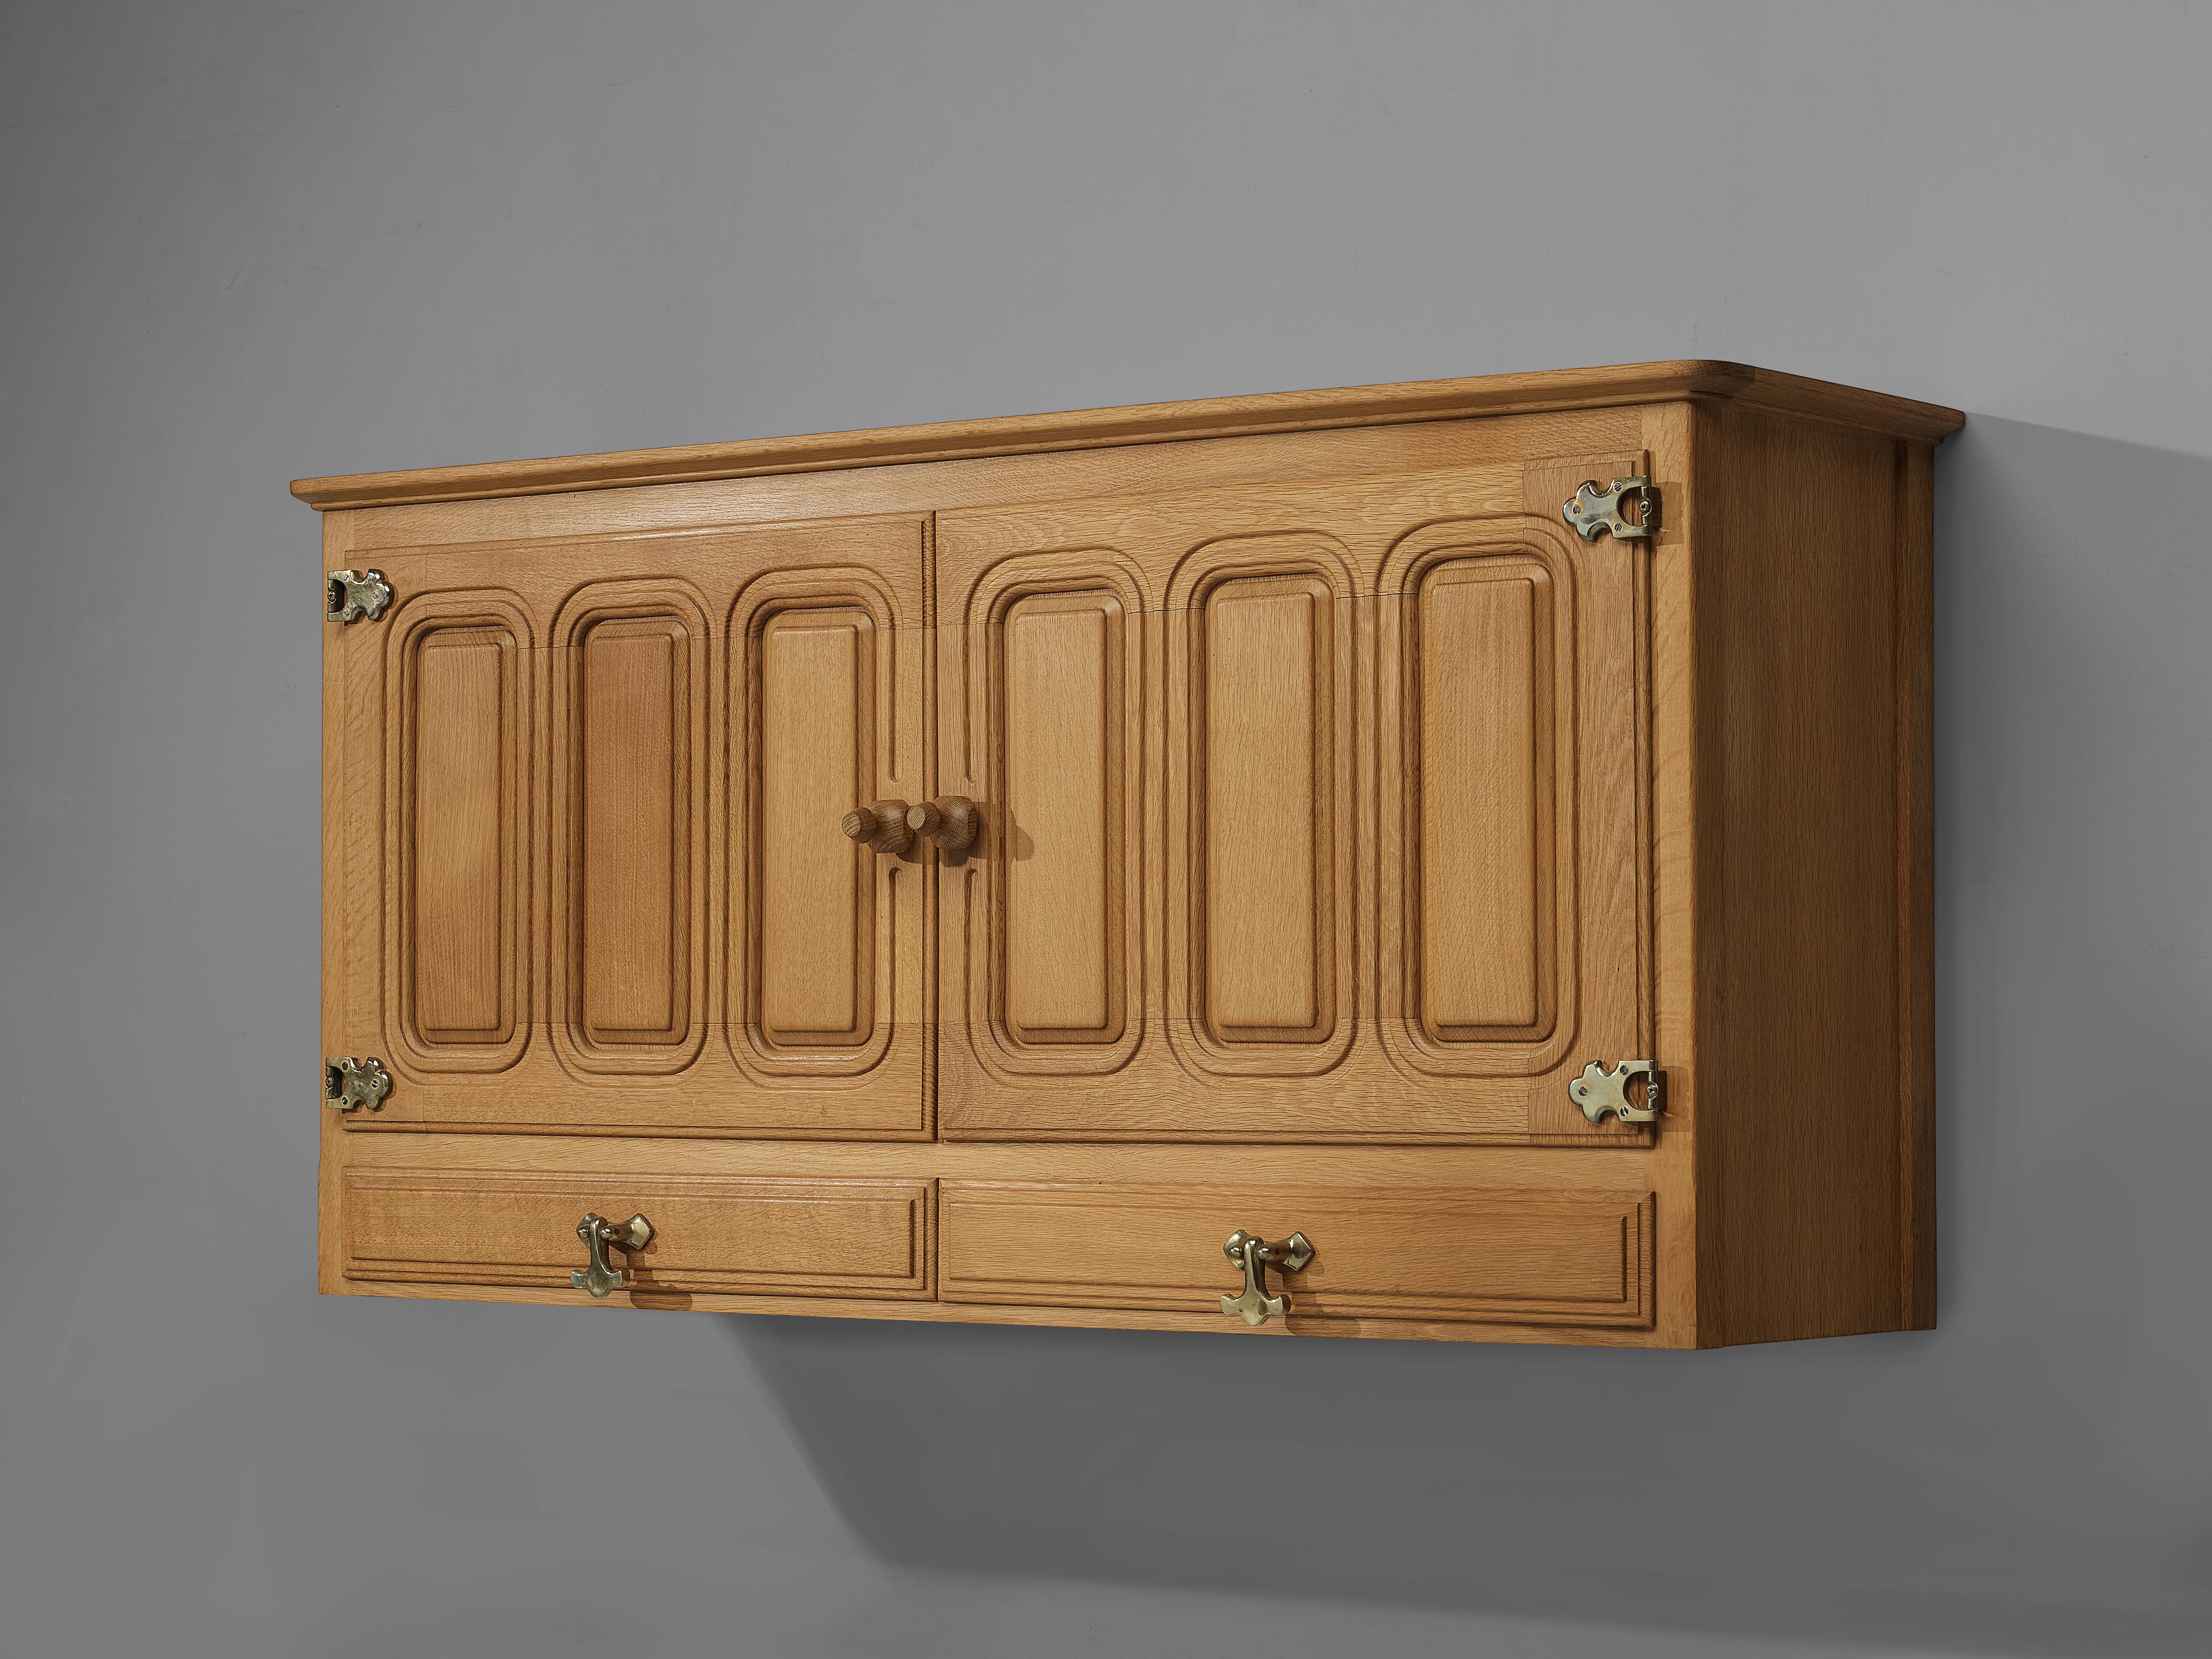 Guillerme et Chambron for Votre Maison, wall-mounted sideboard, oak, France, 1960s.

This charming wall-mounted cabinet features two door panels with geometrical wooden carvings. The cabinet offers plenty of storage such as shelves located behind